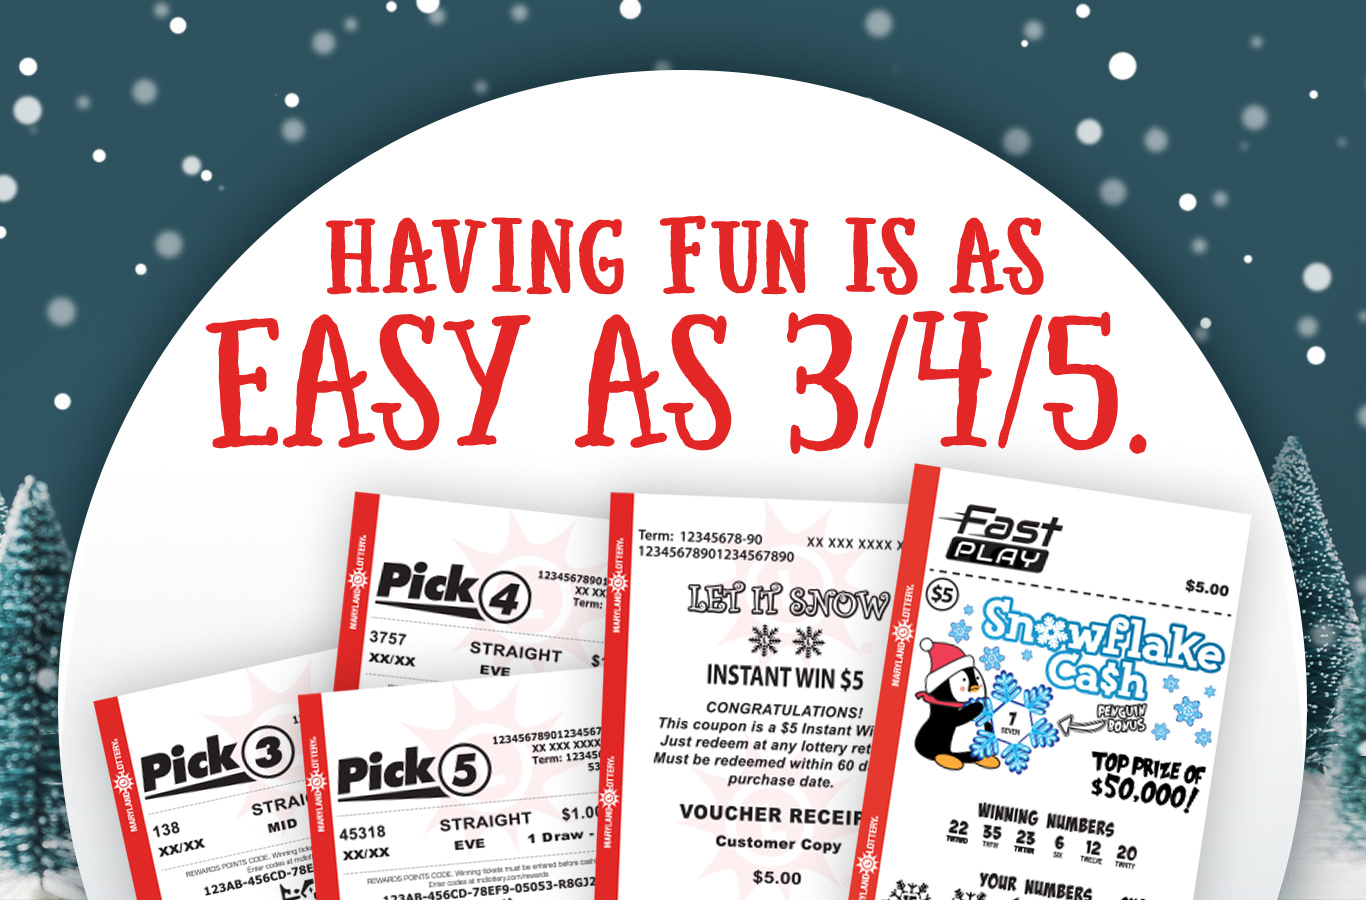 Play Pick 3, Pick 4, and/or Pick 5 for a chance to win cash or a free FAST PLAY ticket through December 25th.